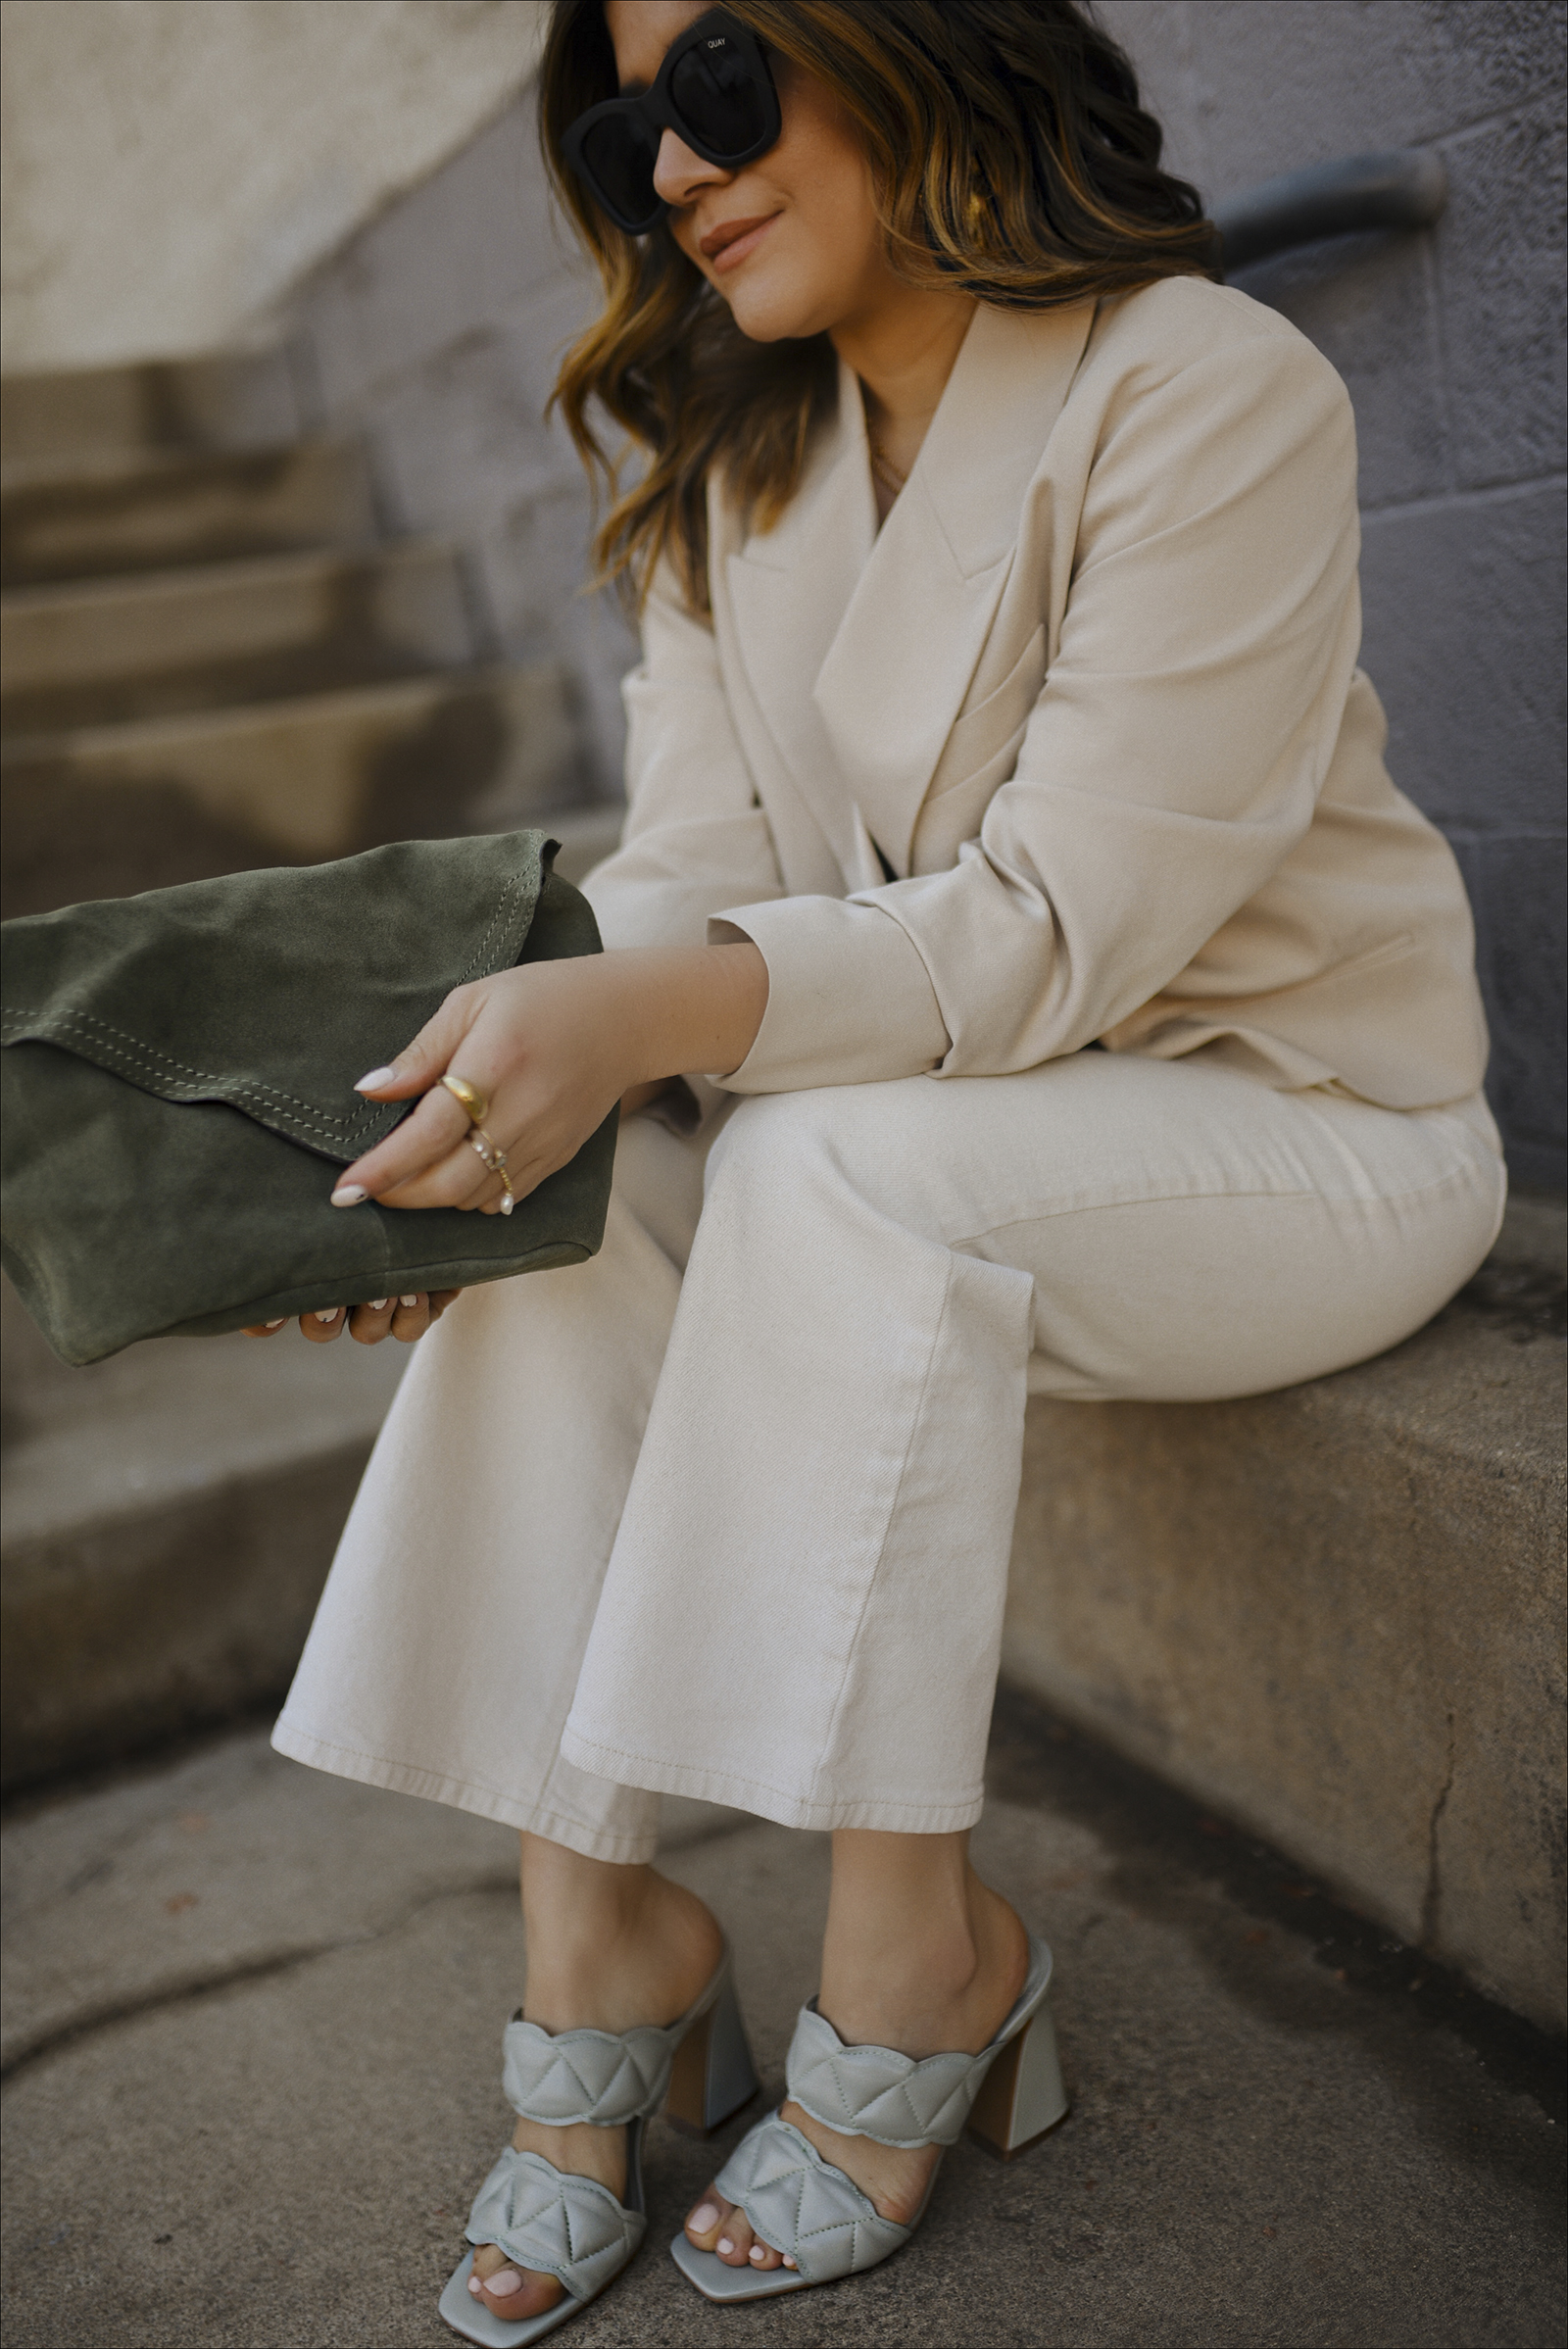 Carolina Hellal of Chic Talk wearing an H&M crop blazer, Wrangle crop jeans, Vince Camuto mules and suede bag and Quay sunglasses.